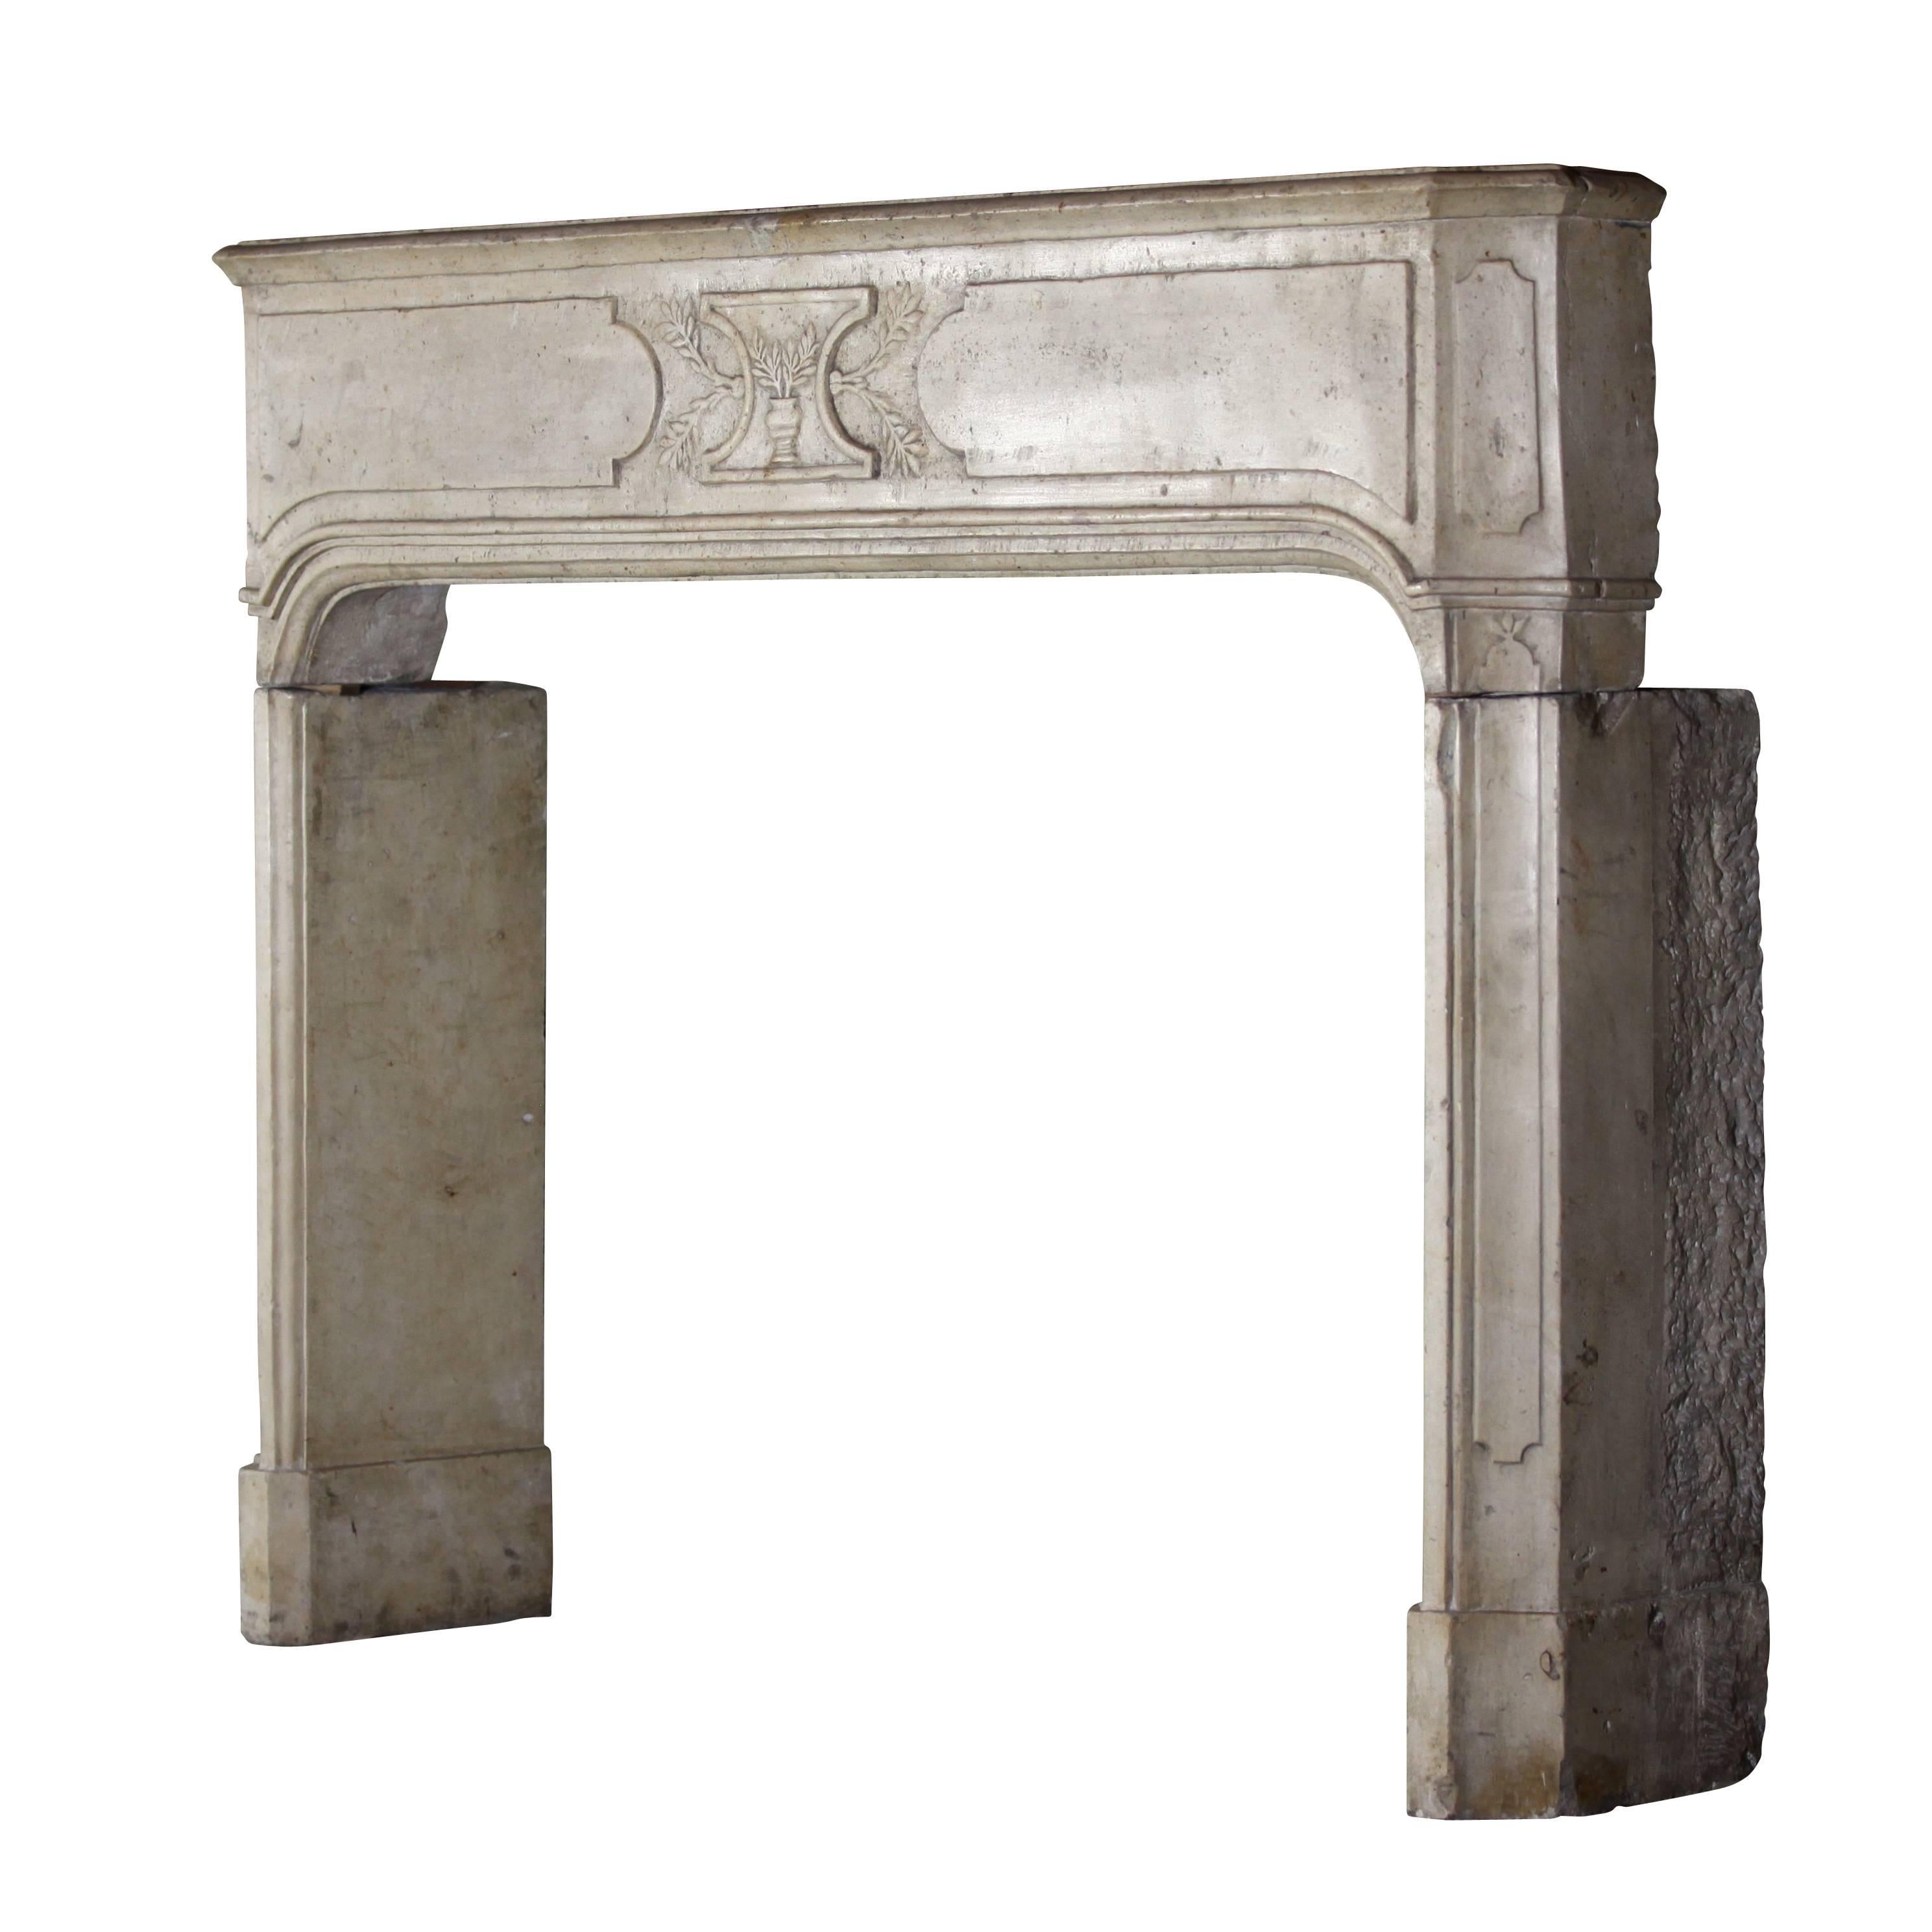 Louis XIV 18th Century French Country Hard Limestone Antique Fireplace Surround For Sale